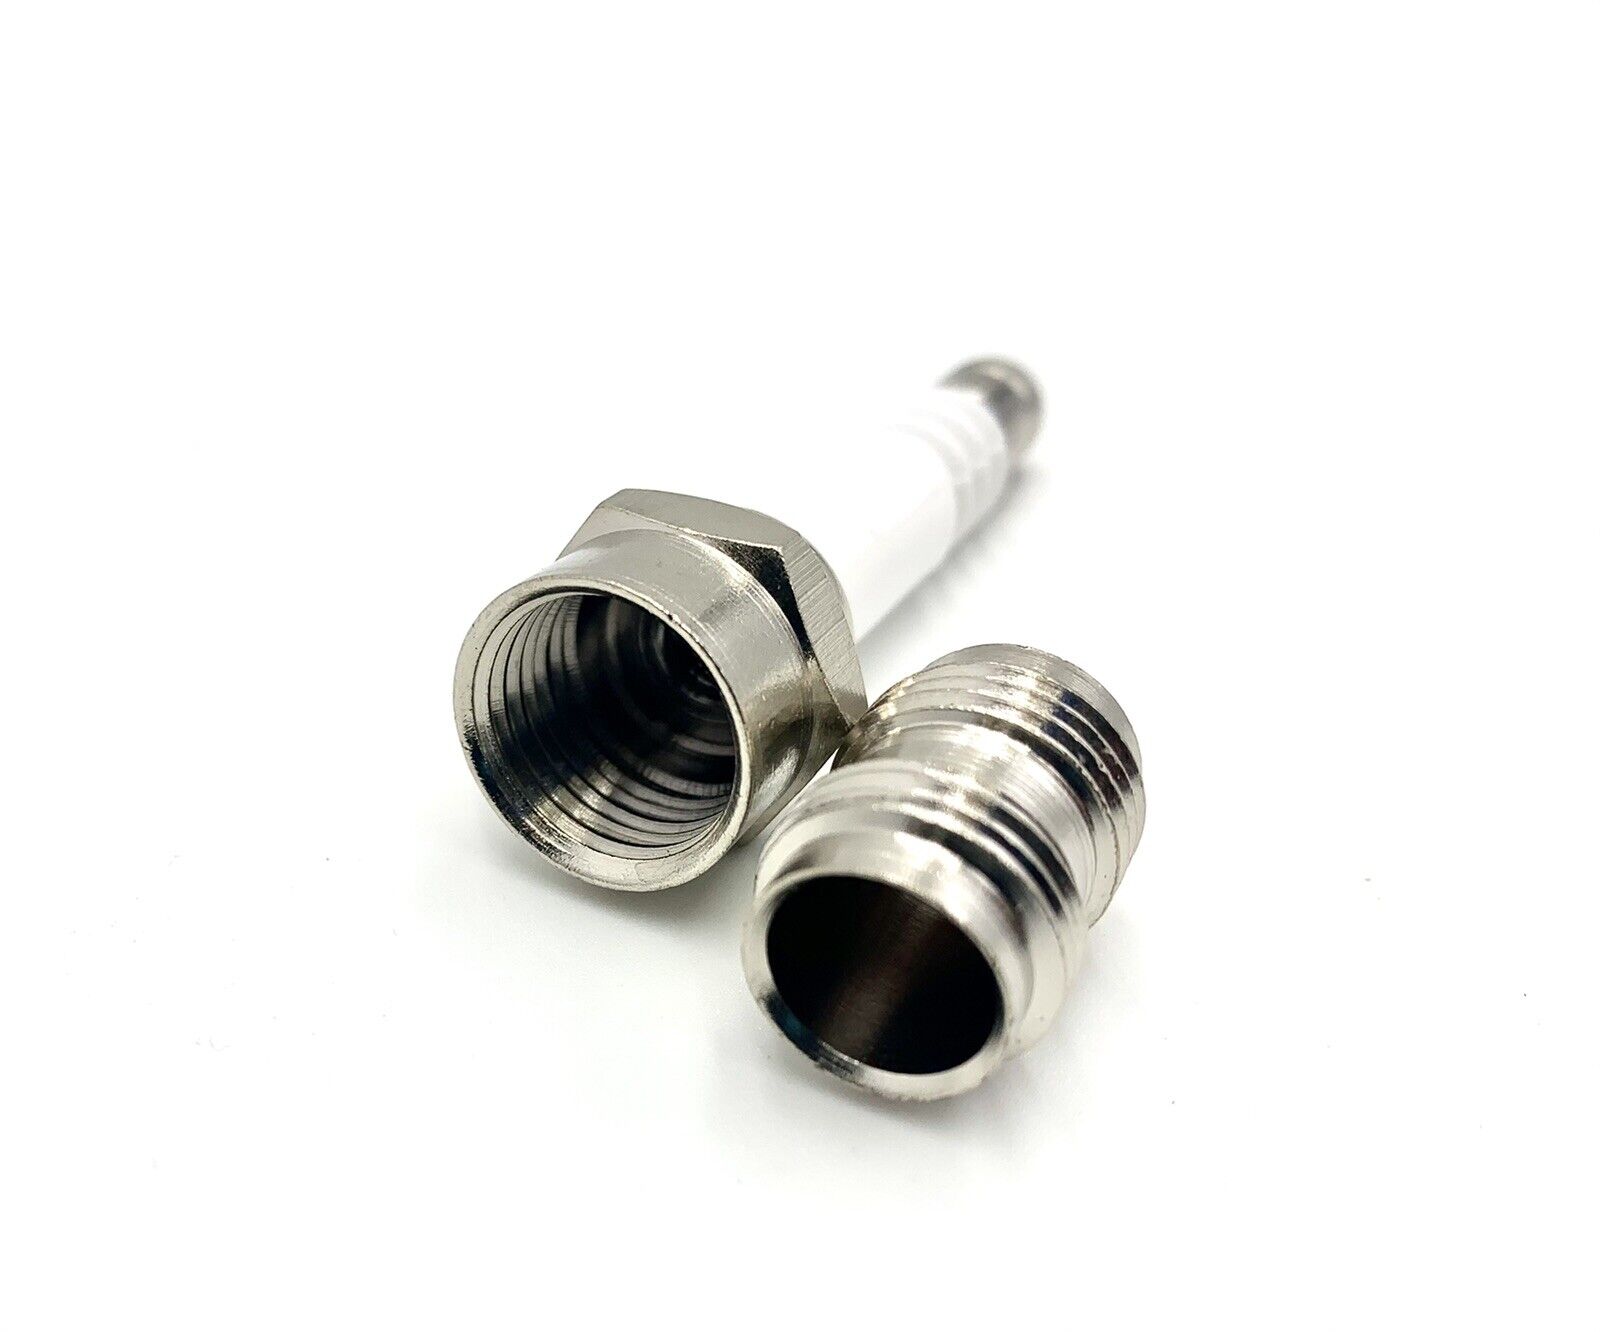 2 SPARK PLUG  PIPES   PER ORDER . Great For One Hitter